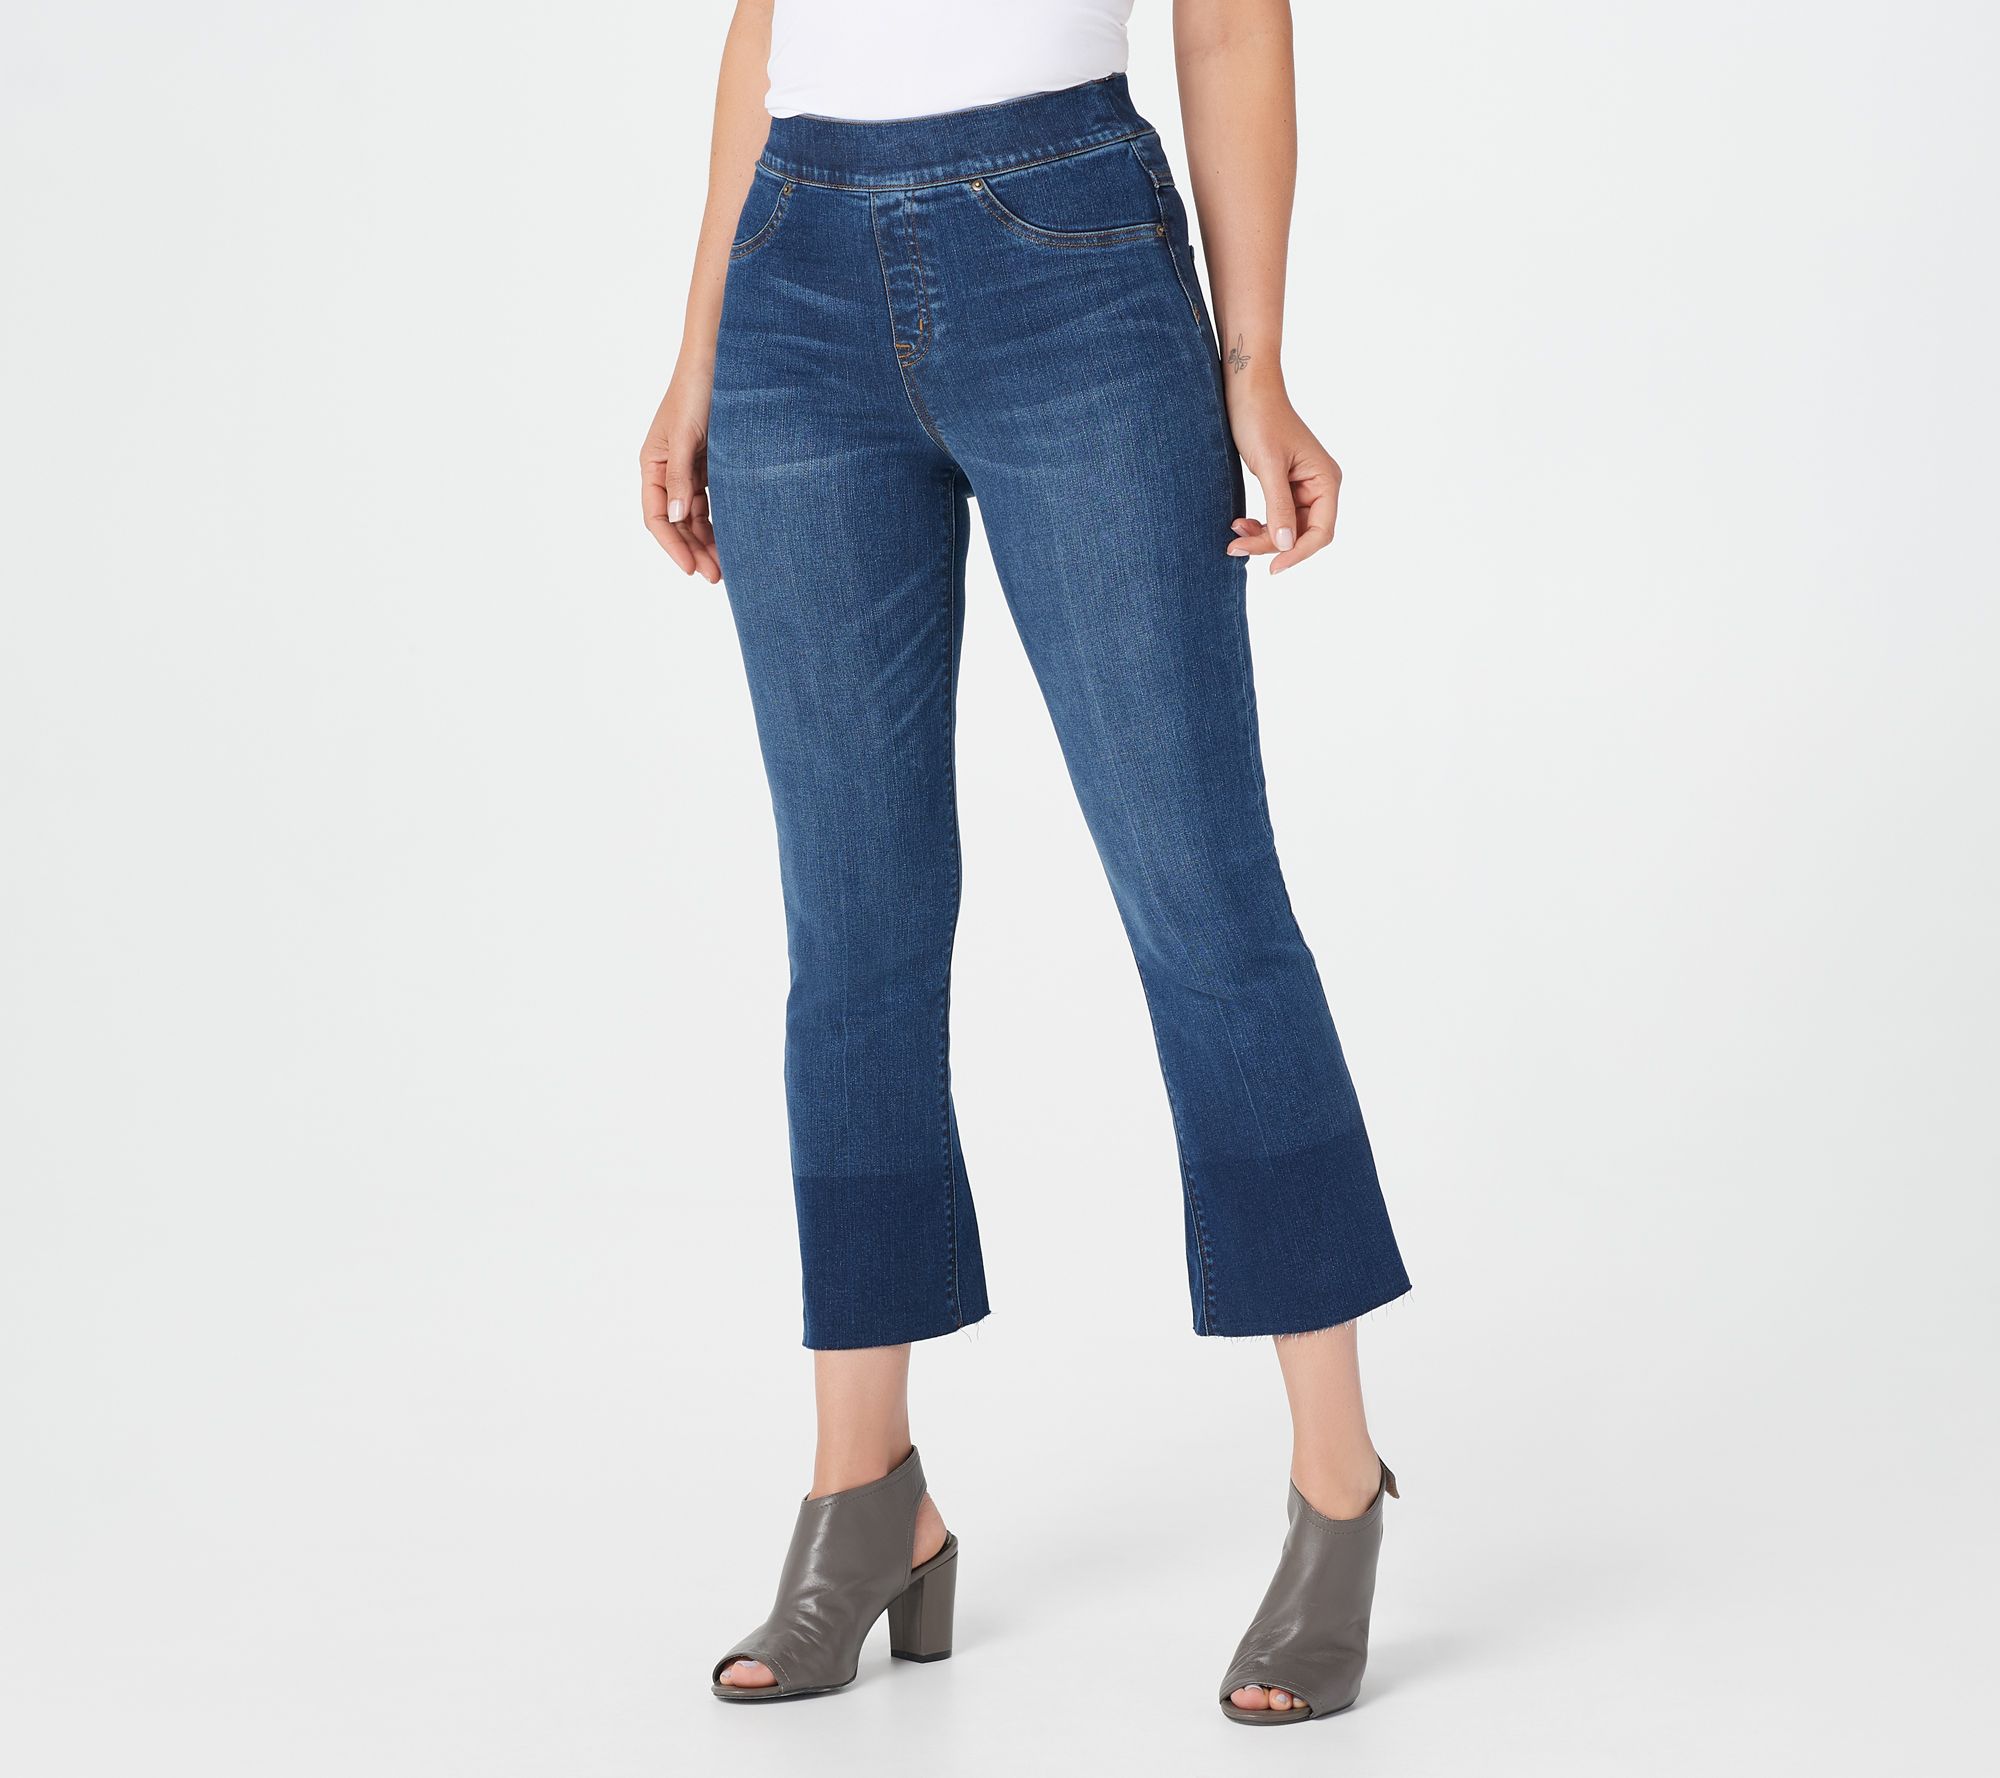 SPANX Cropped Flare Jeans, Black - Jeans - Bottoms - The Blue Door Boutique